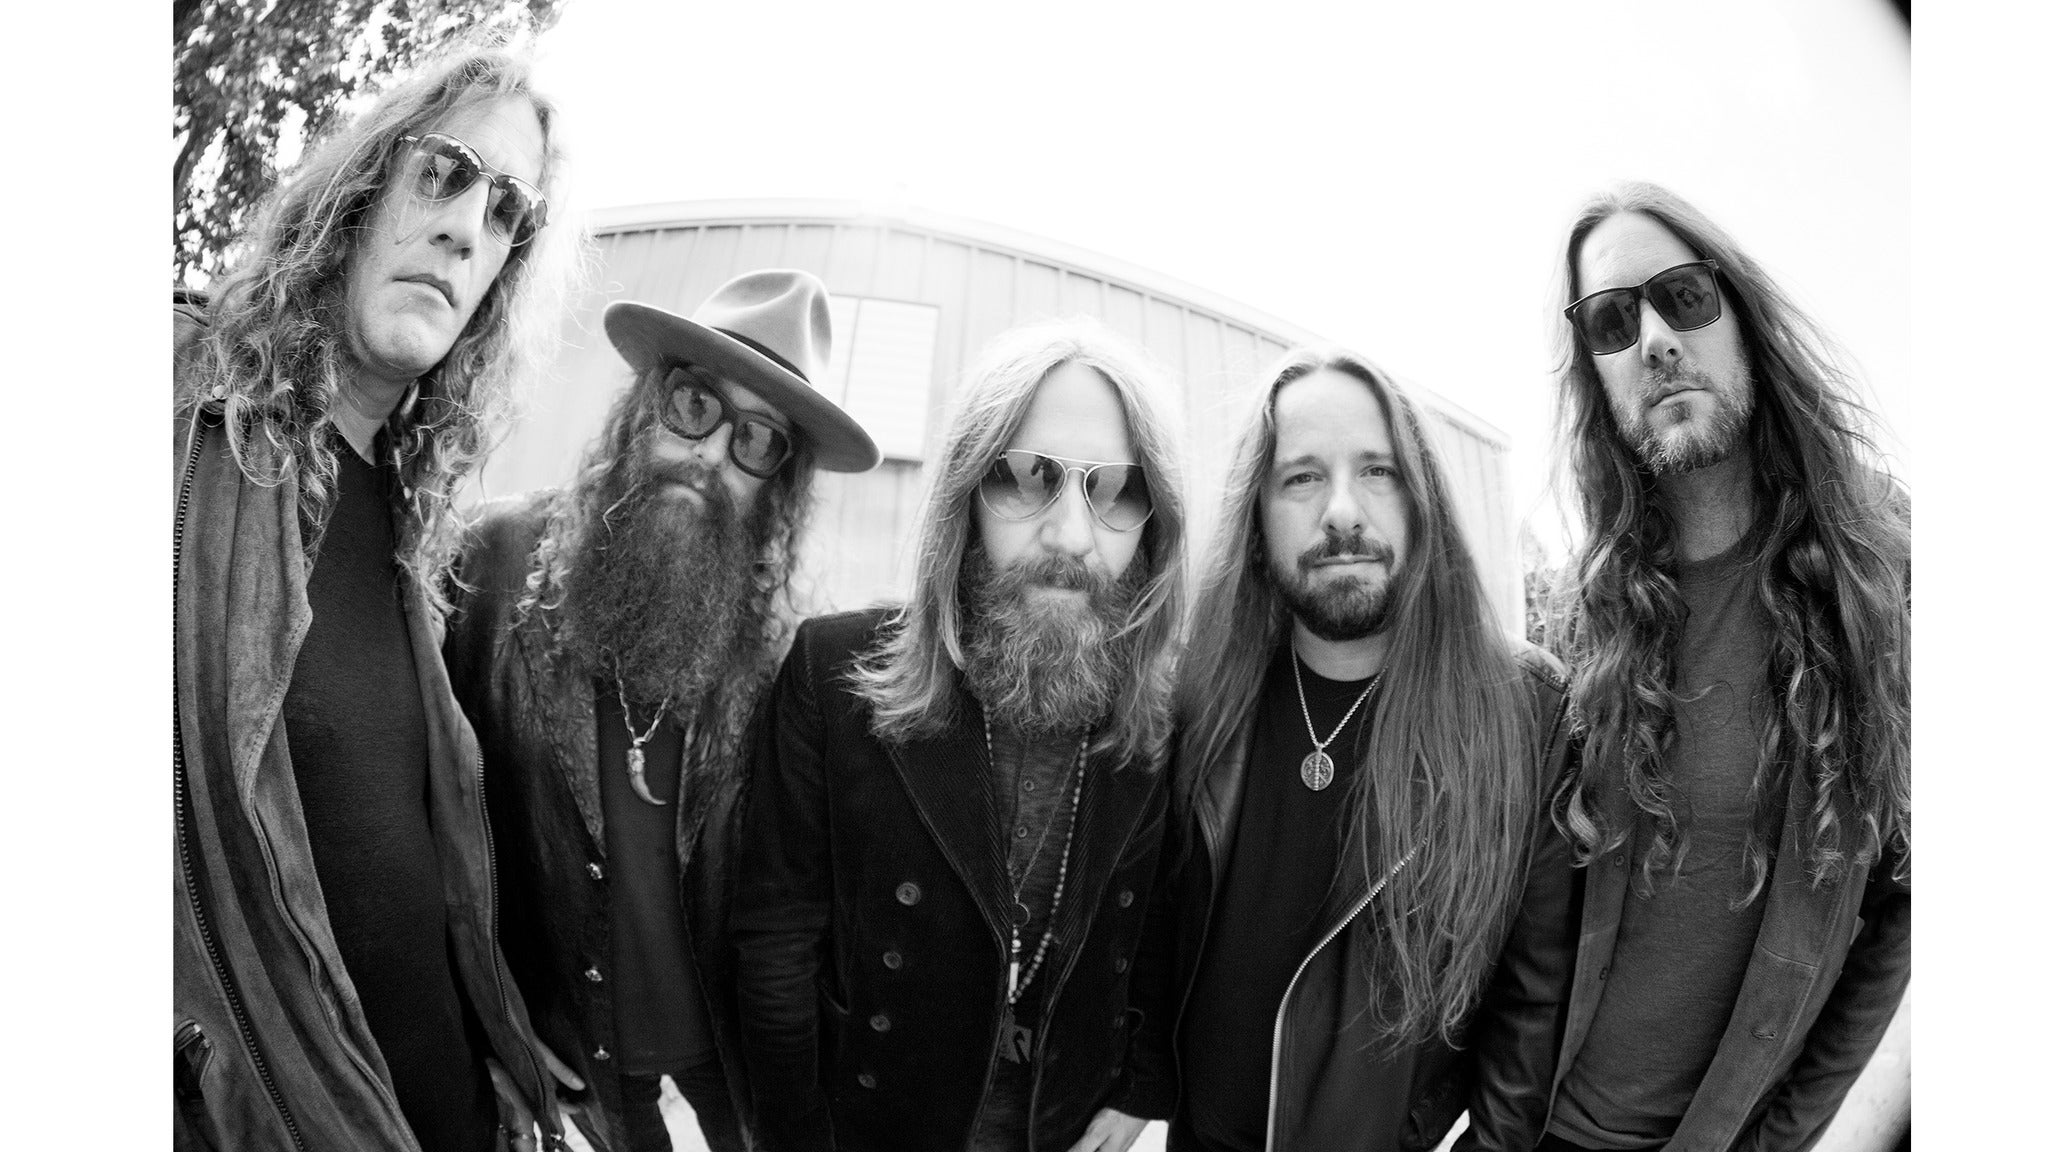 Image used with permission from Ticketmaster | Blackberry Smoke tickets